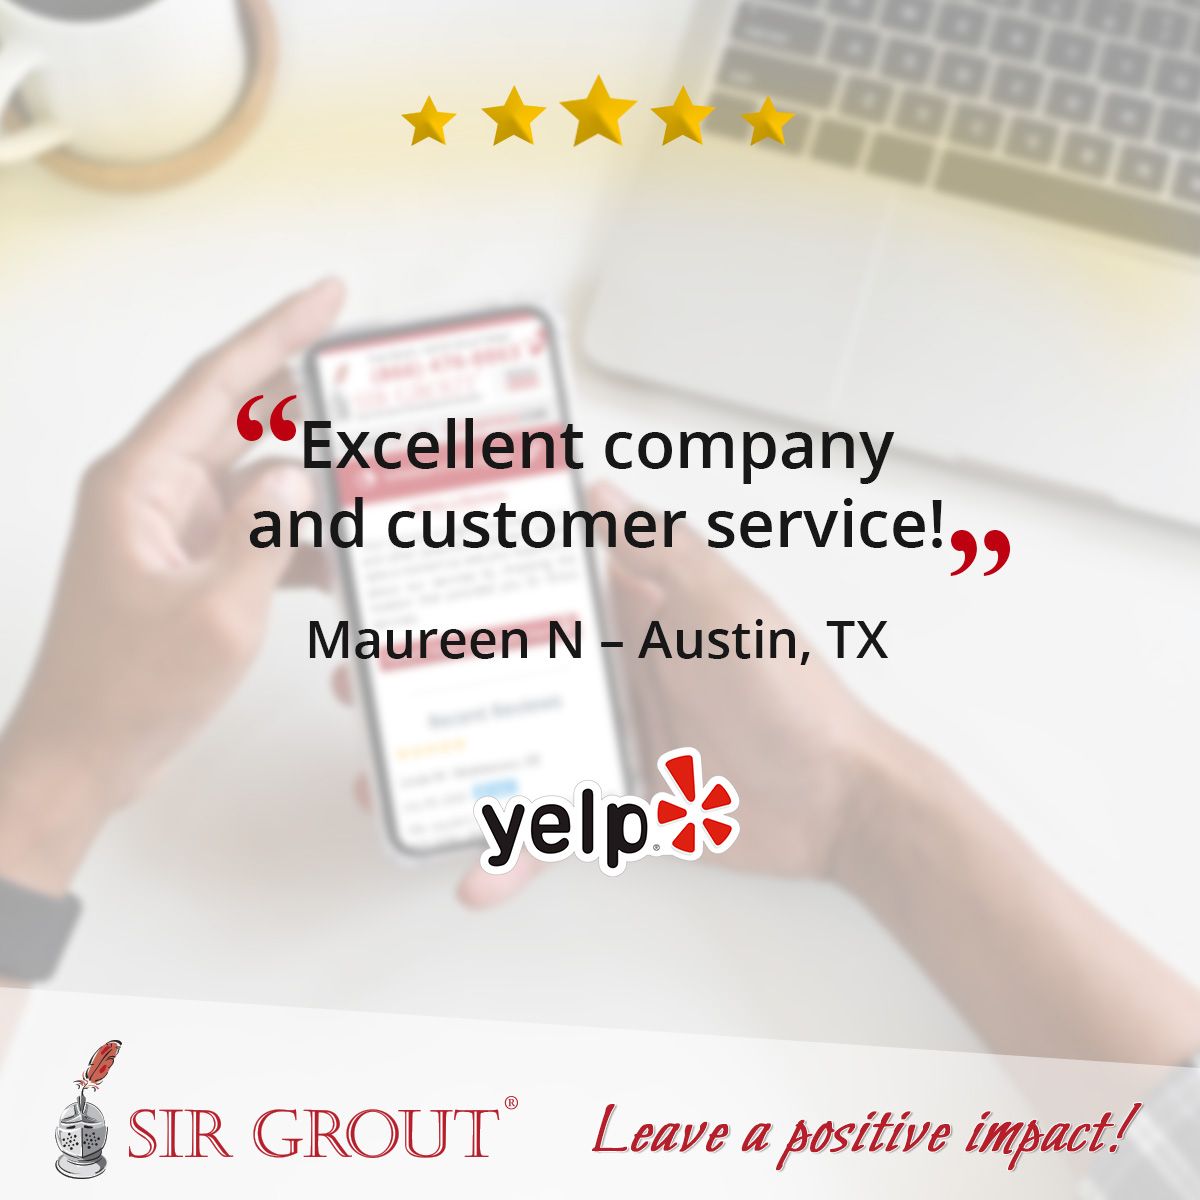 Excellent company and customer service!